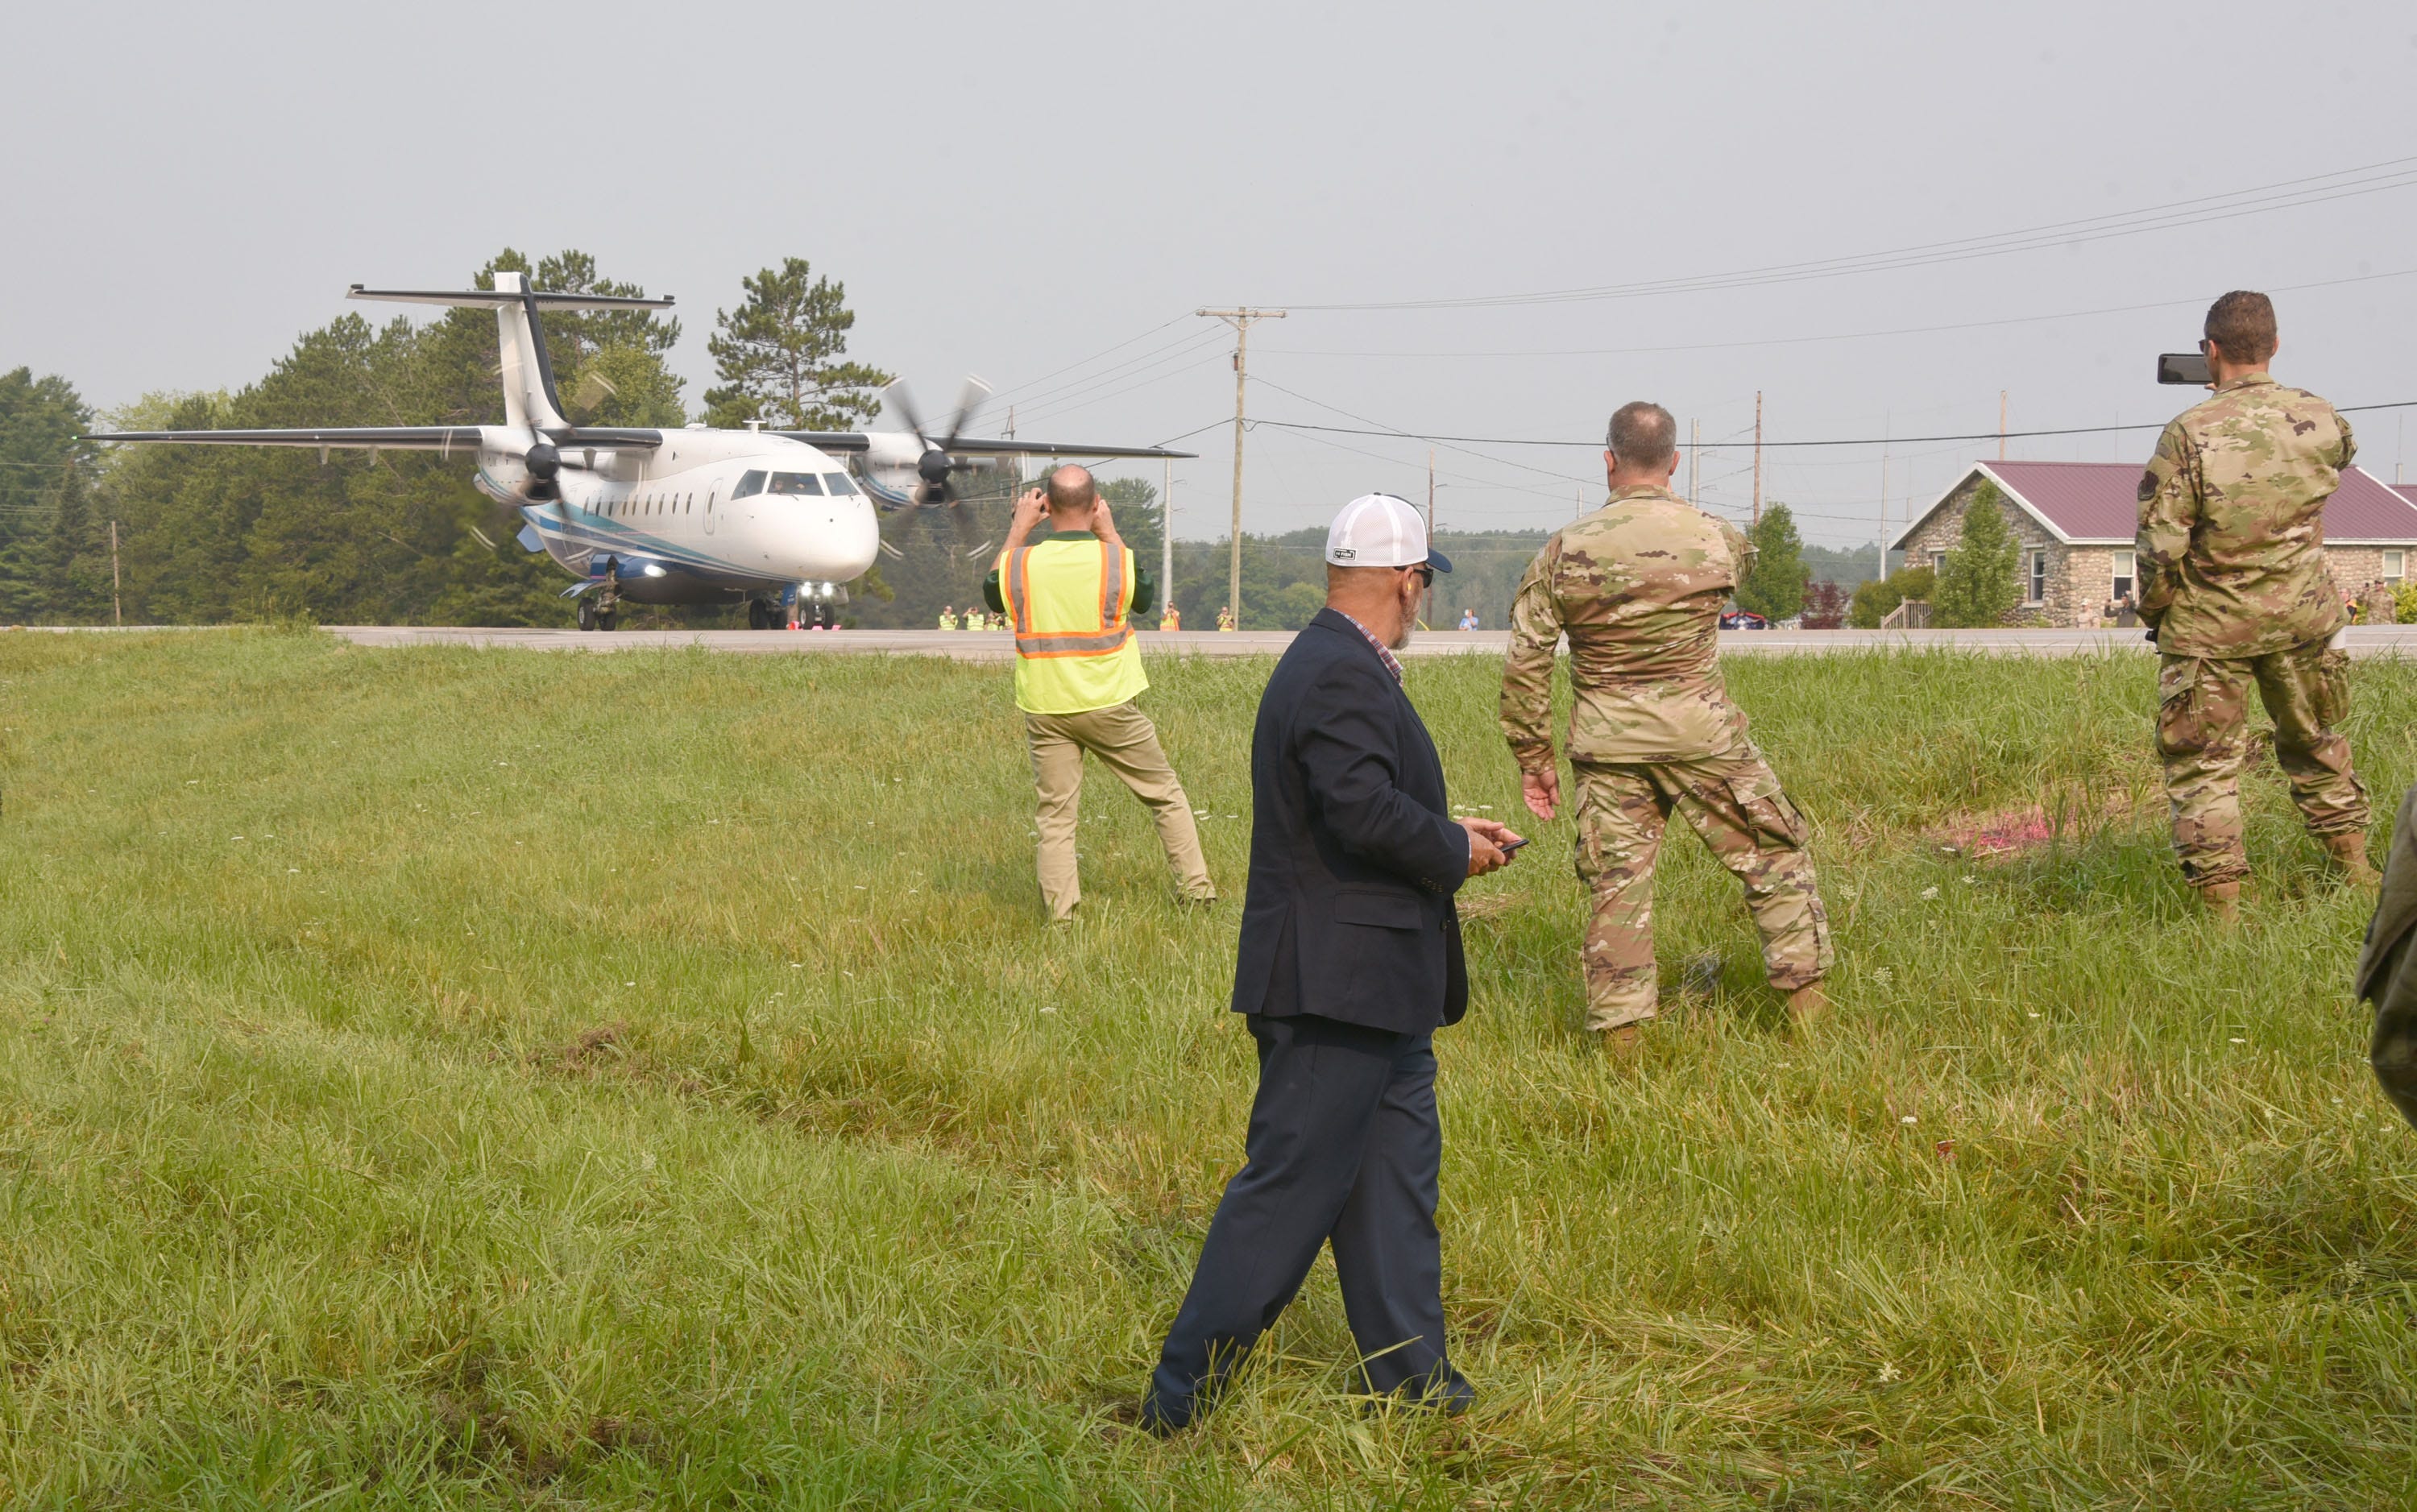 A military prop aircraft C-146 prepares to take off on highway M-32 west of Alpena Thursday, August 5, 2021. Four separate aircraft practiced landing on the closed highway, practicing fo war-readiness training during Operation Northern Strike.